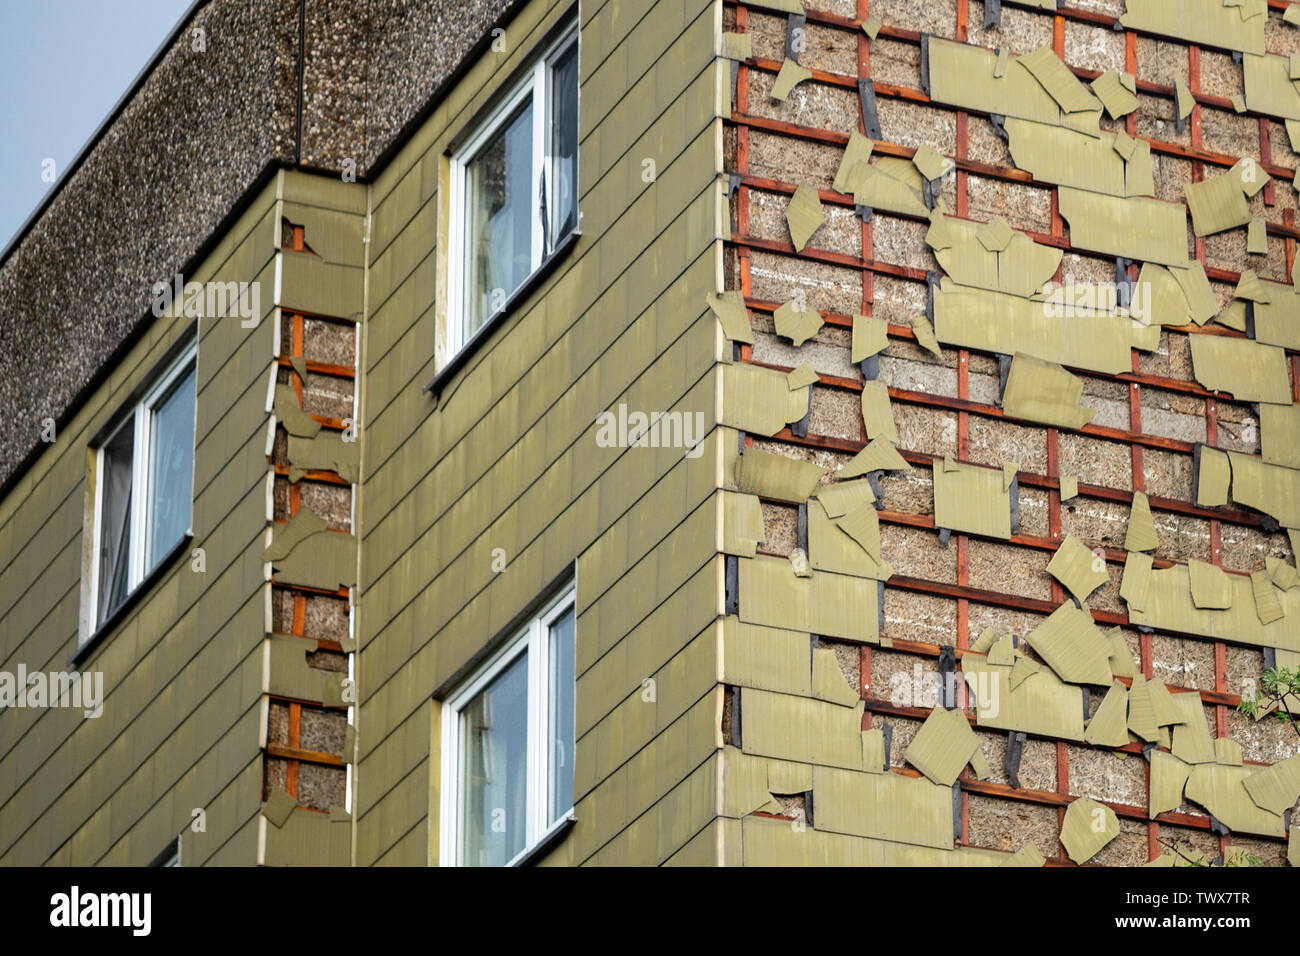 Hail damage to asbestic cladding of an older house Stock Photo